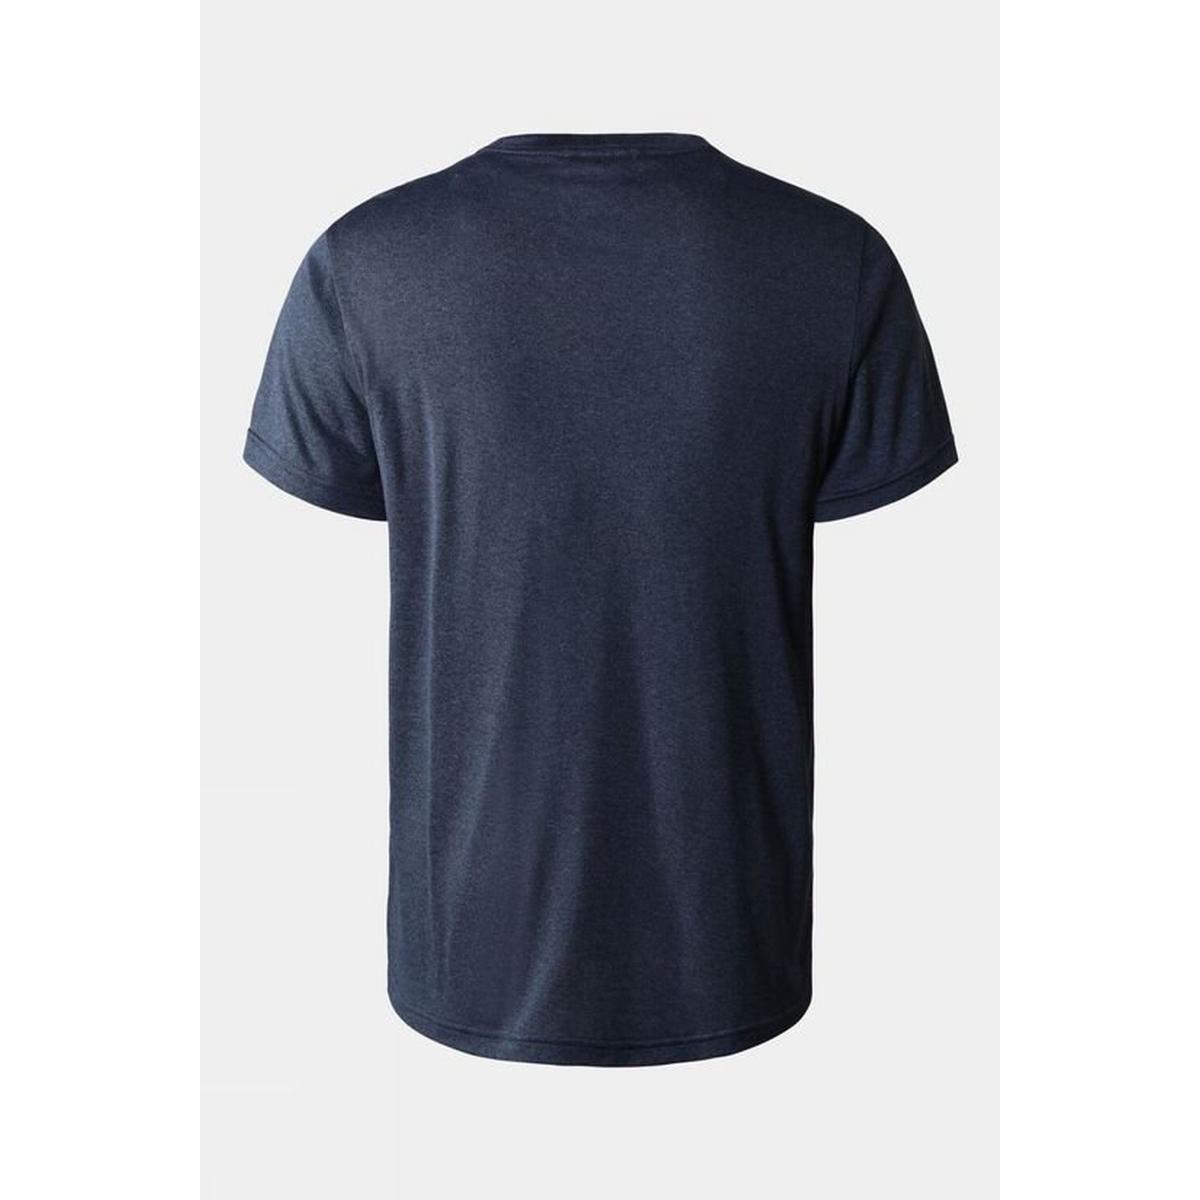 The North Face Men's Relaxion Amp Crew T-Shirt - Navy